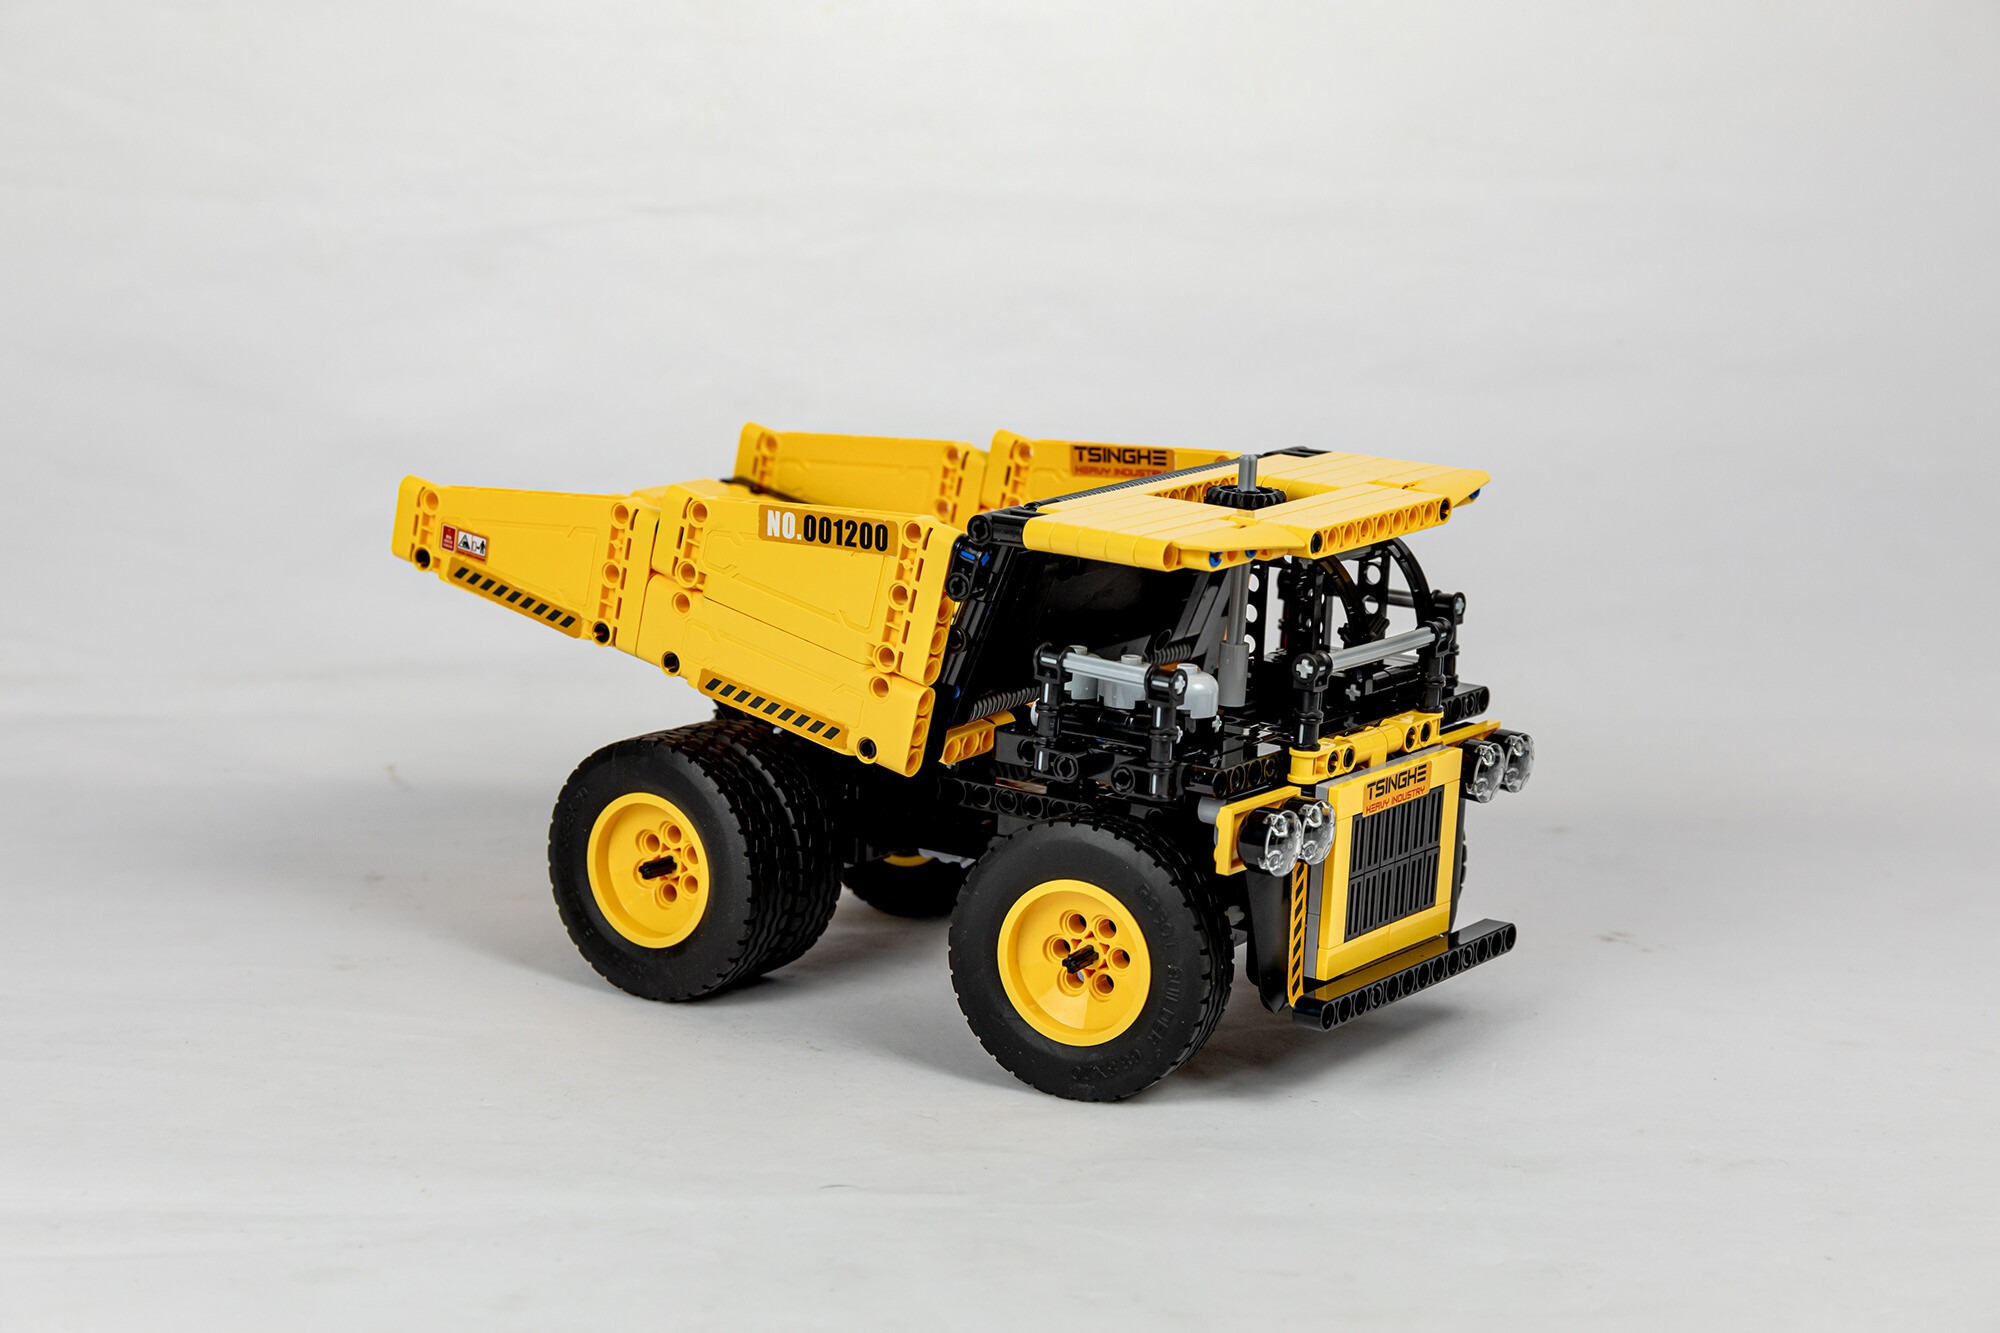 Конструктор Onebot Engineering Mining Truck OBKSC55AIQI 526 PCS Yellow EU kids toy car large multi function parking lot rail cars alloy engineering container truck 4 6y boy child educational toys gifts